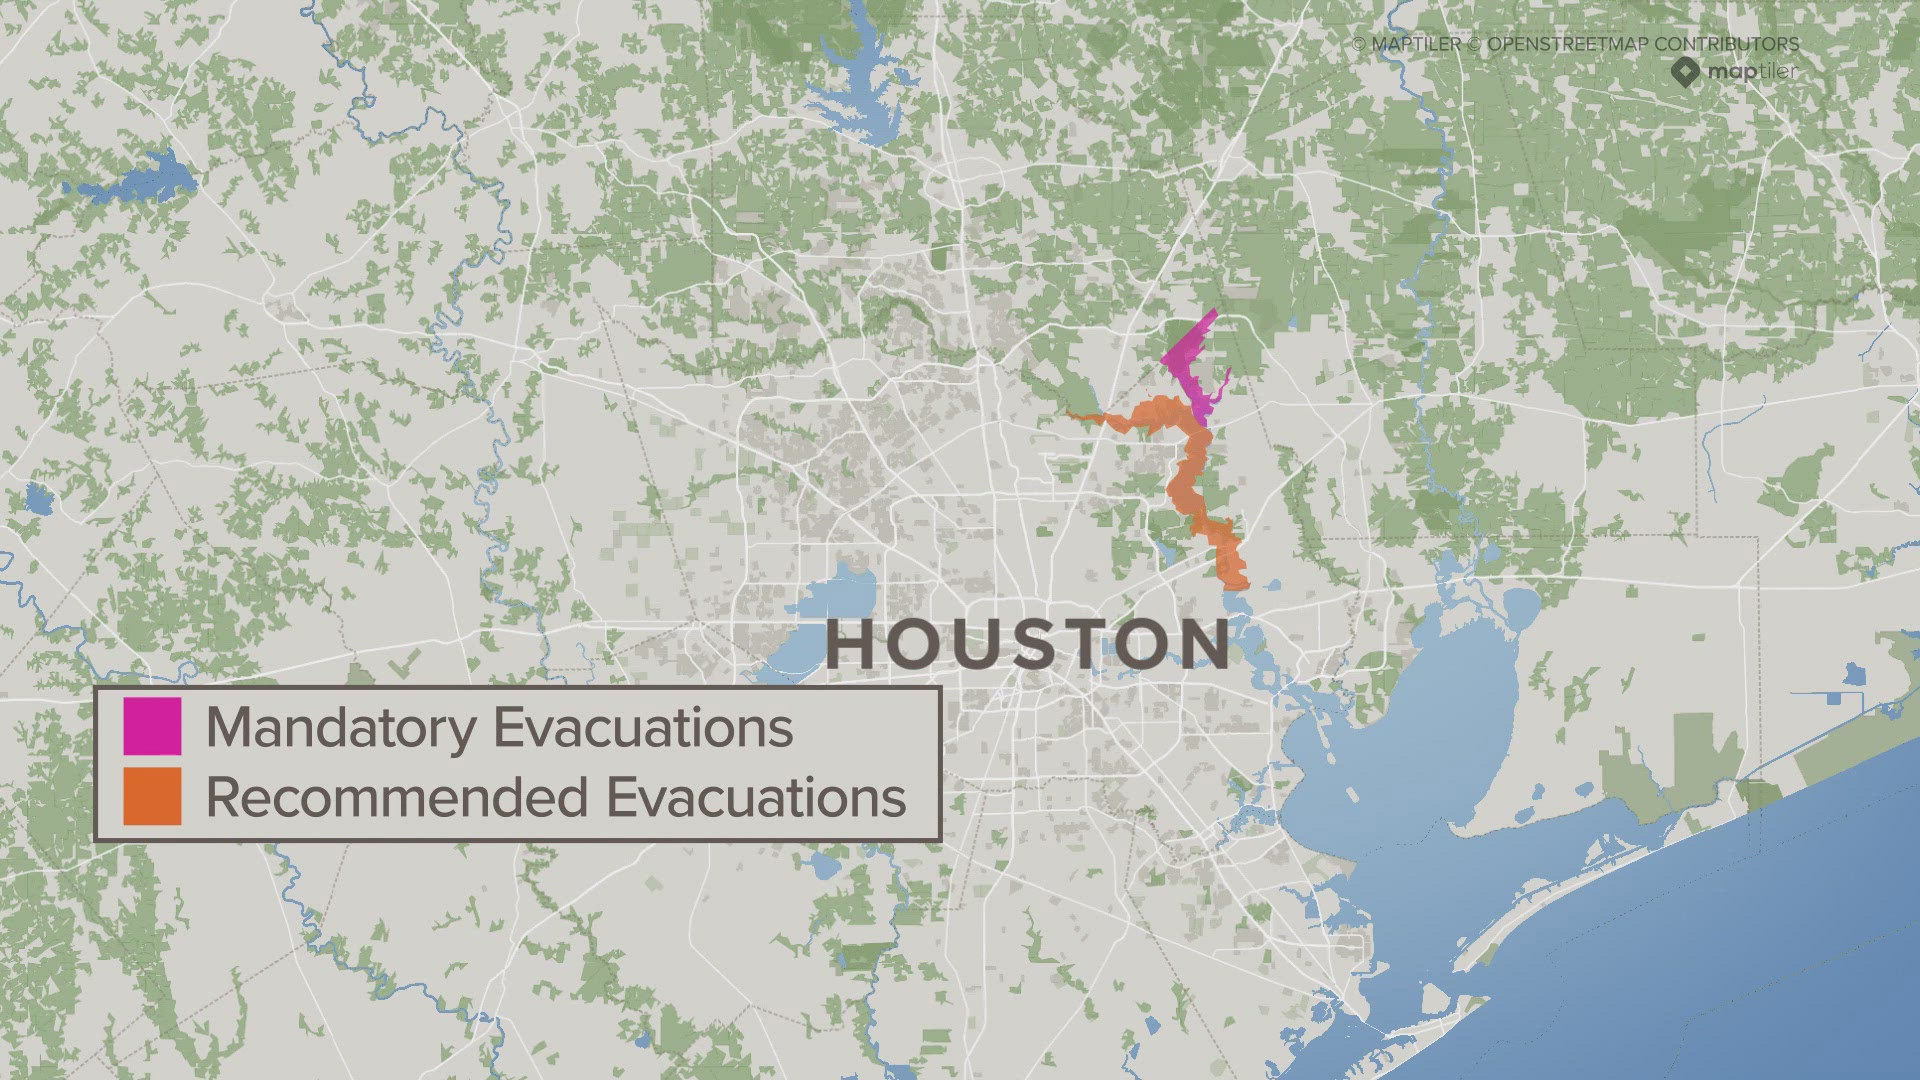 KHOU 11's Shern-Min Chow has an update oon mandatory and voluntary evacuations across the county.